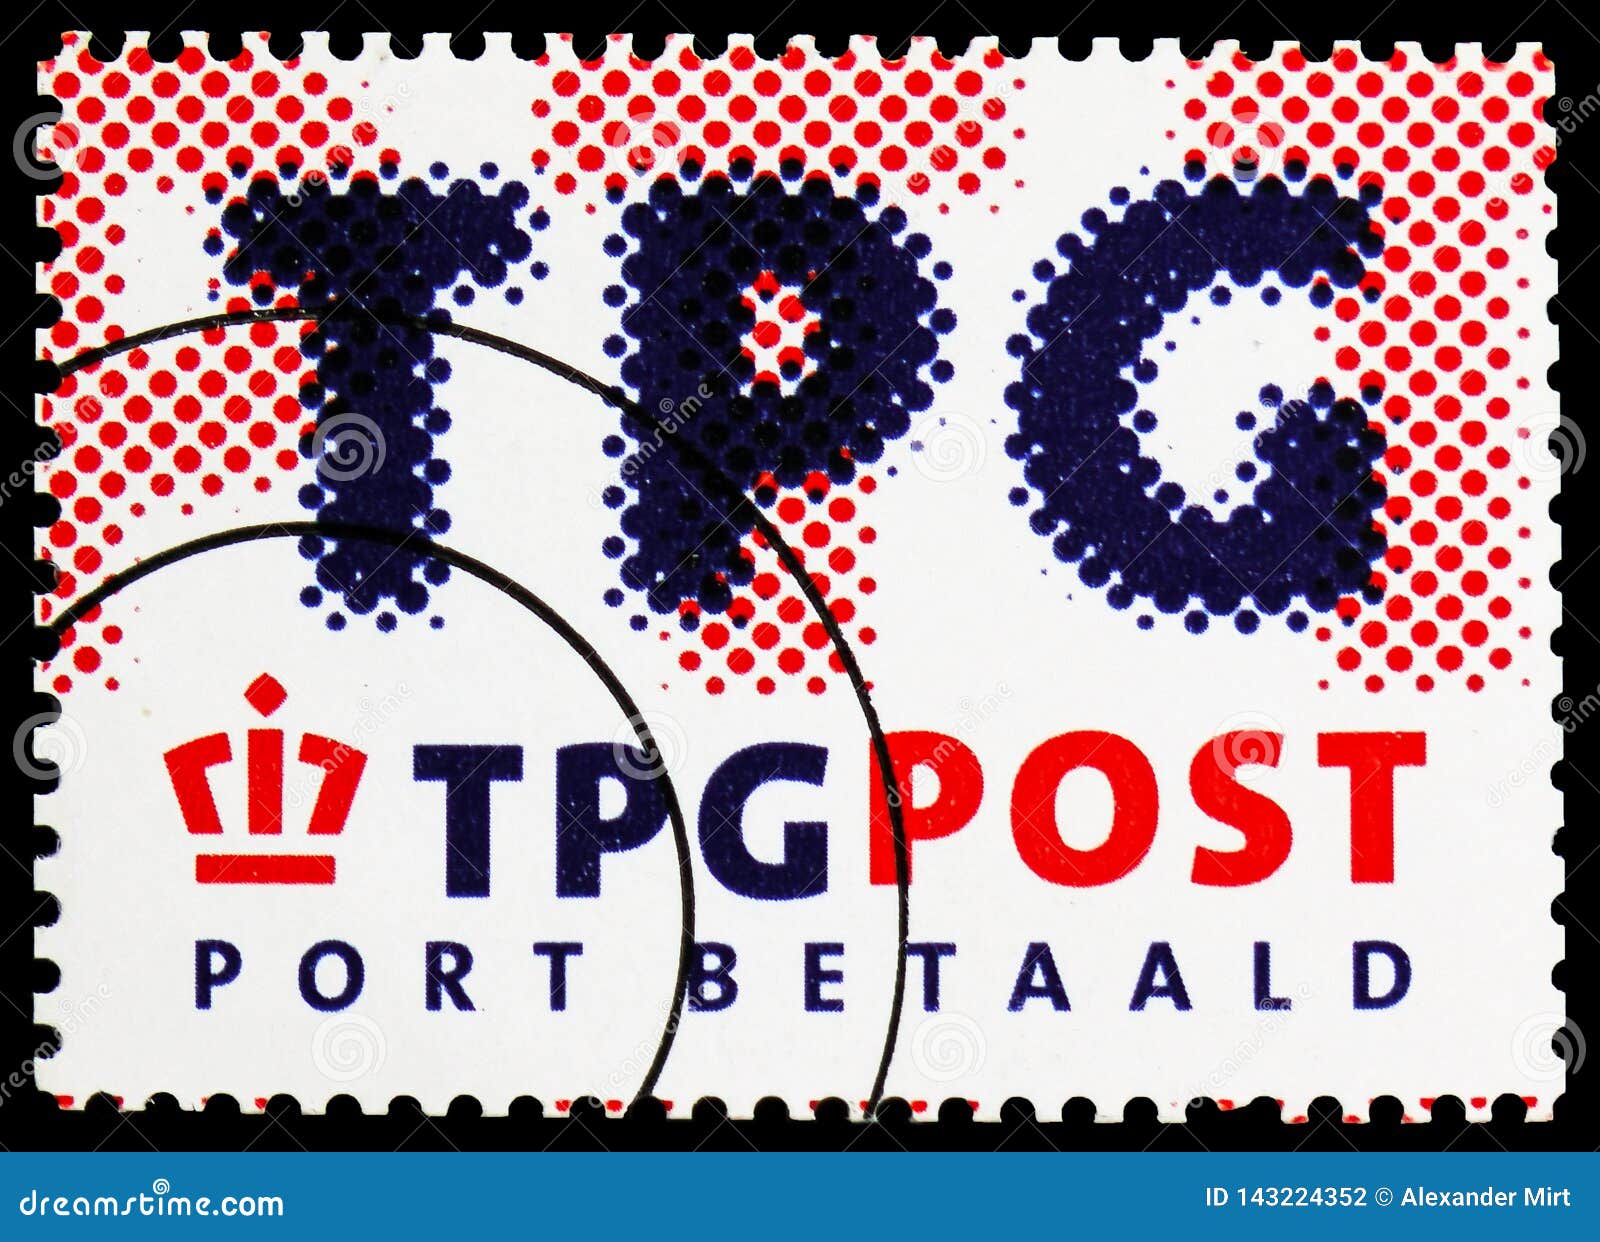 Tpg Post Port Betaald Serie Circa 2003 Editorial Photography Image Of 2003 Correspondence 143224352